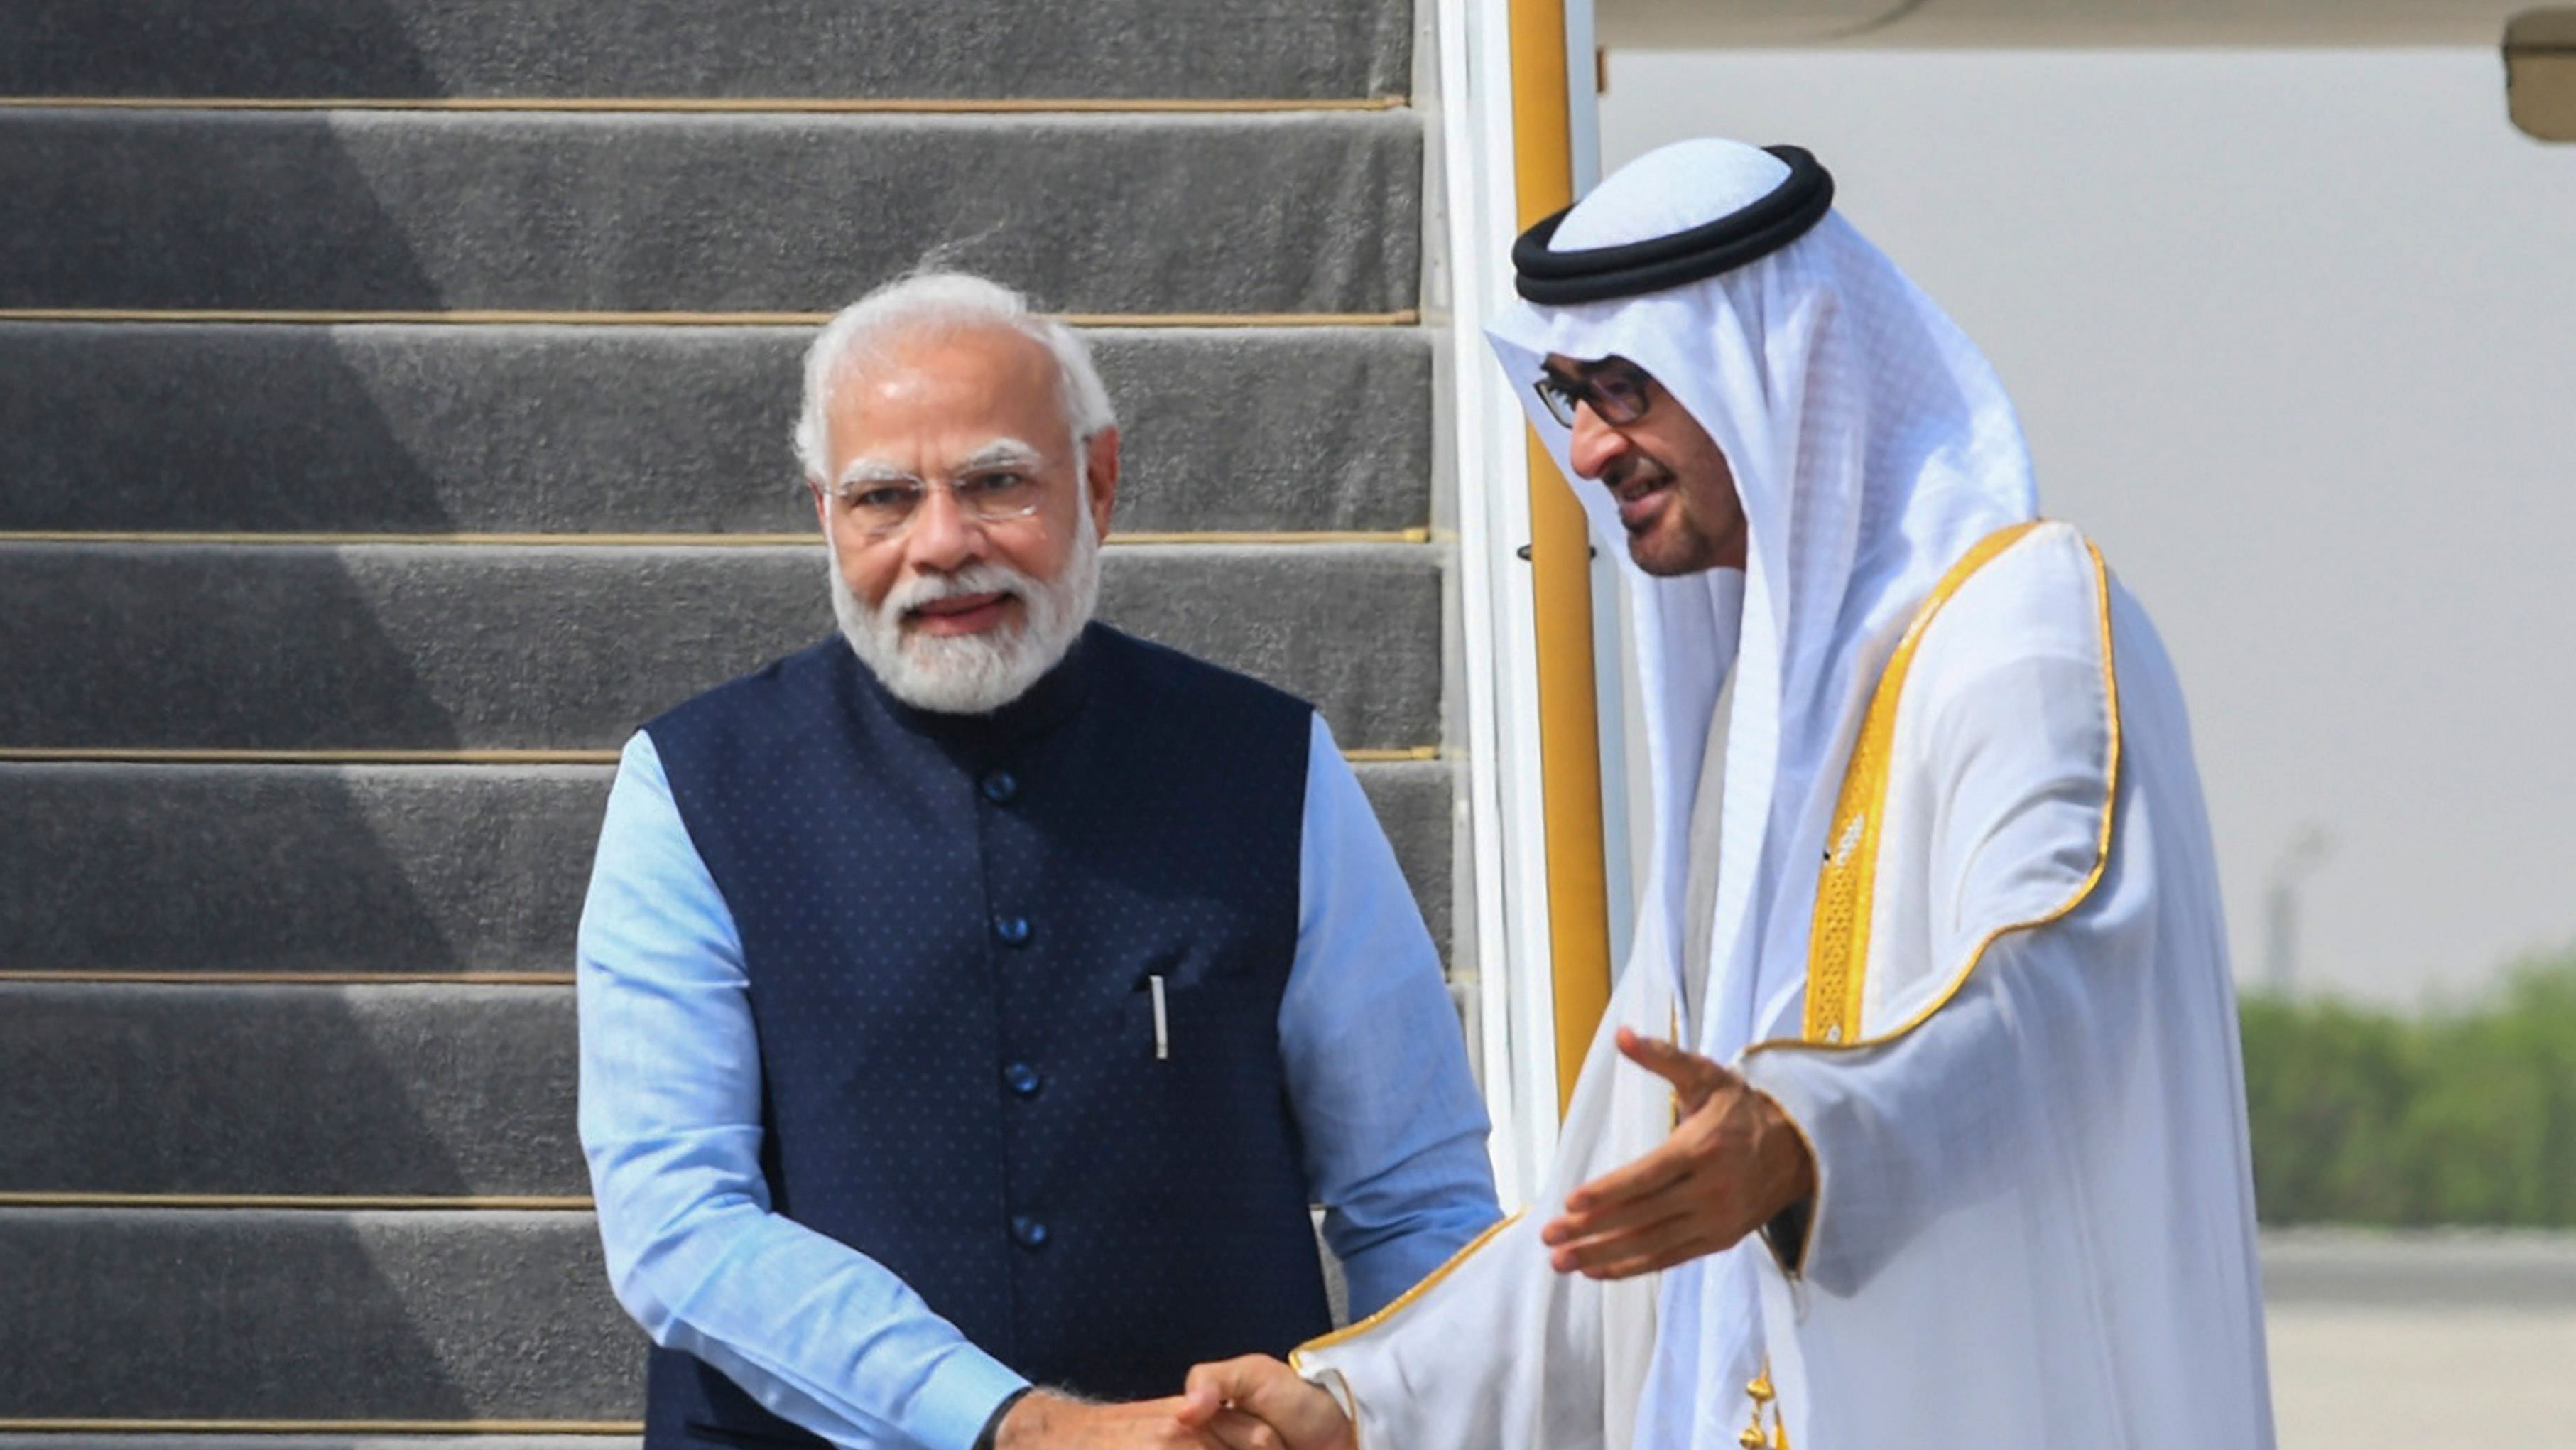 Prime Minister Narendra Modi being welcomed by President of UAE Sheikh Mohamed bin Zayed Al Nahyan upon his arrival, in Abu Dhabi. Credit: PTI Photo